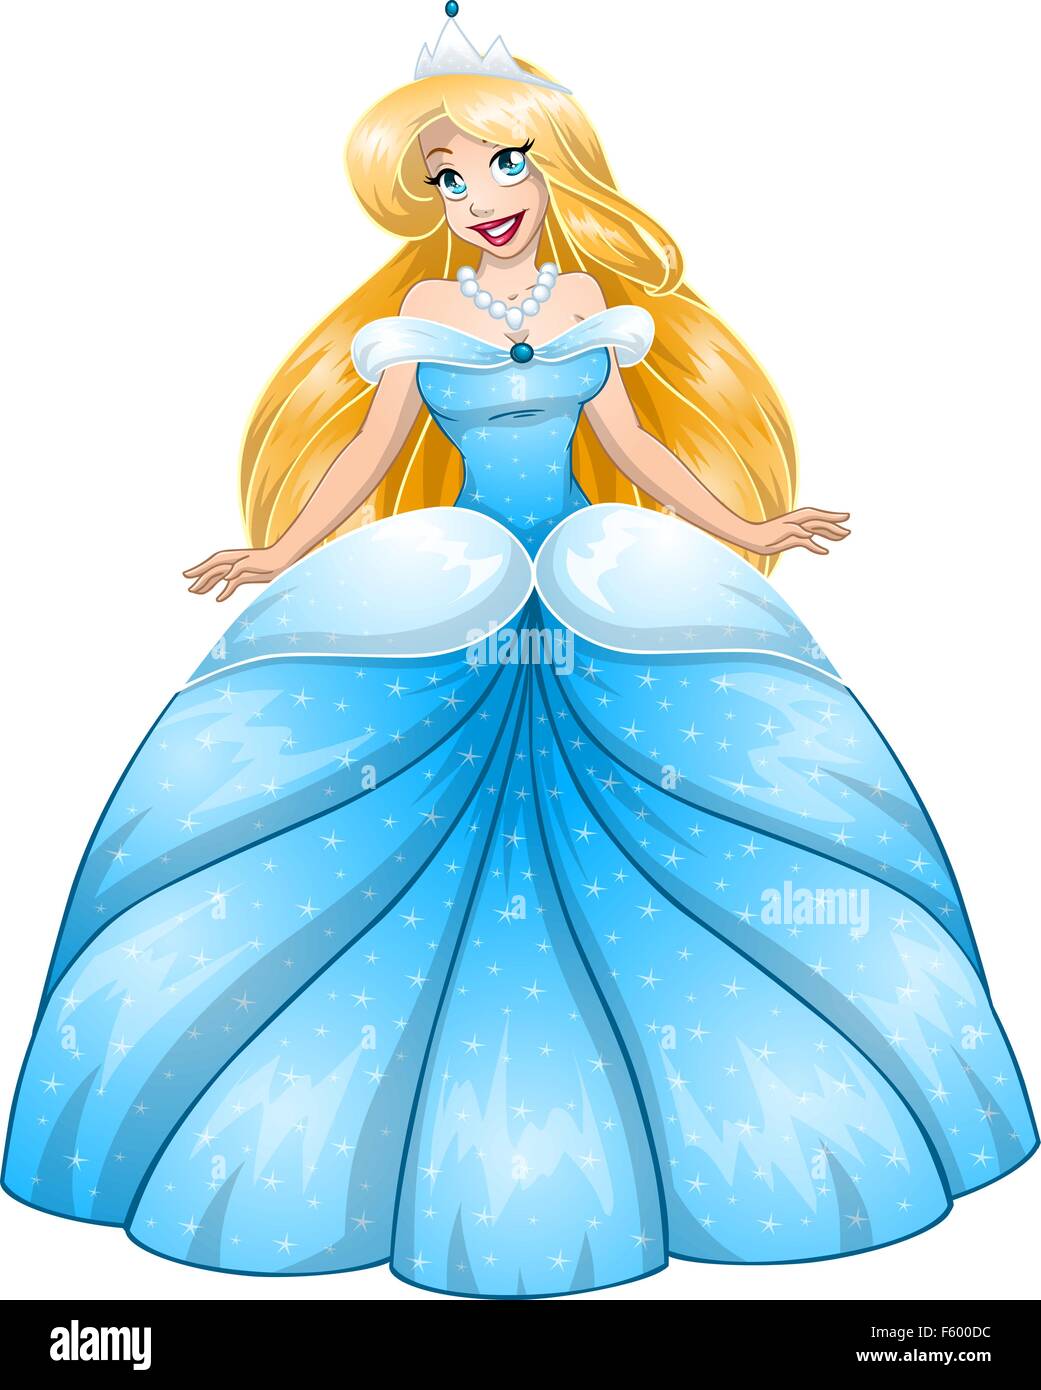 Vector illustration of a beautiful blond princess in blue dress. Stock Vector